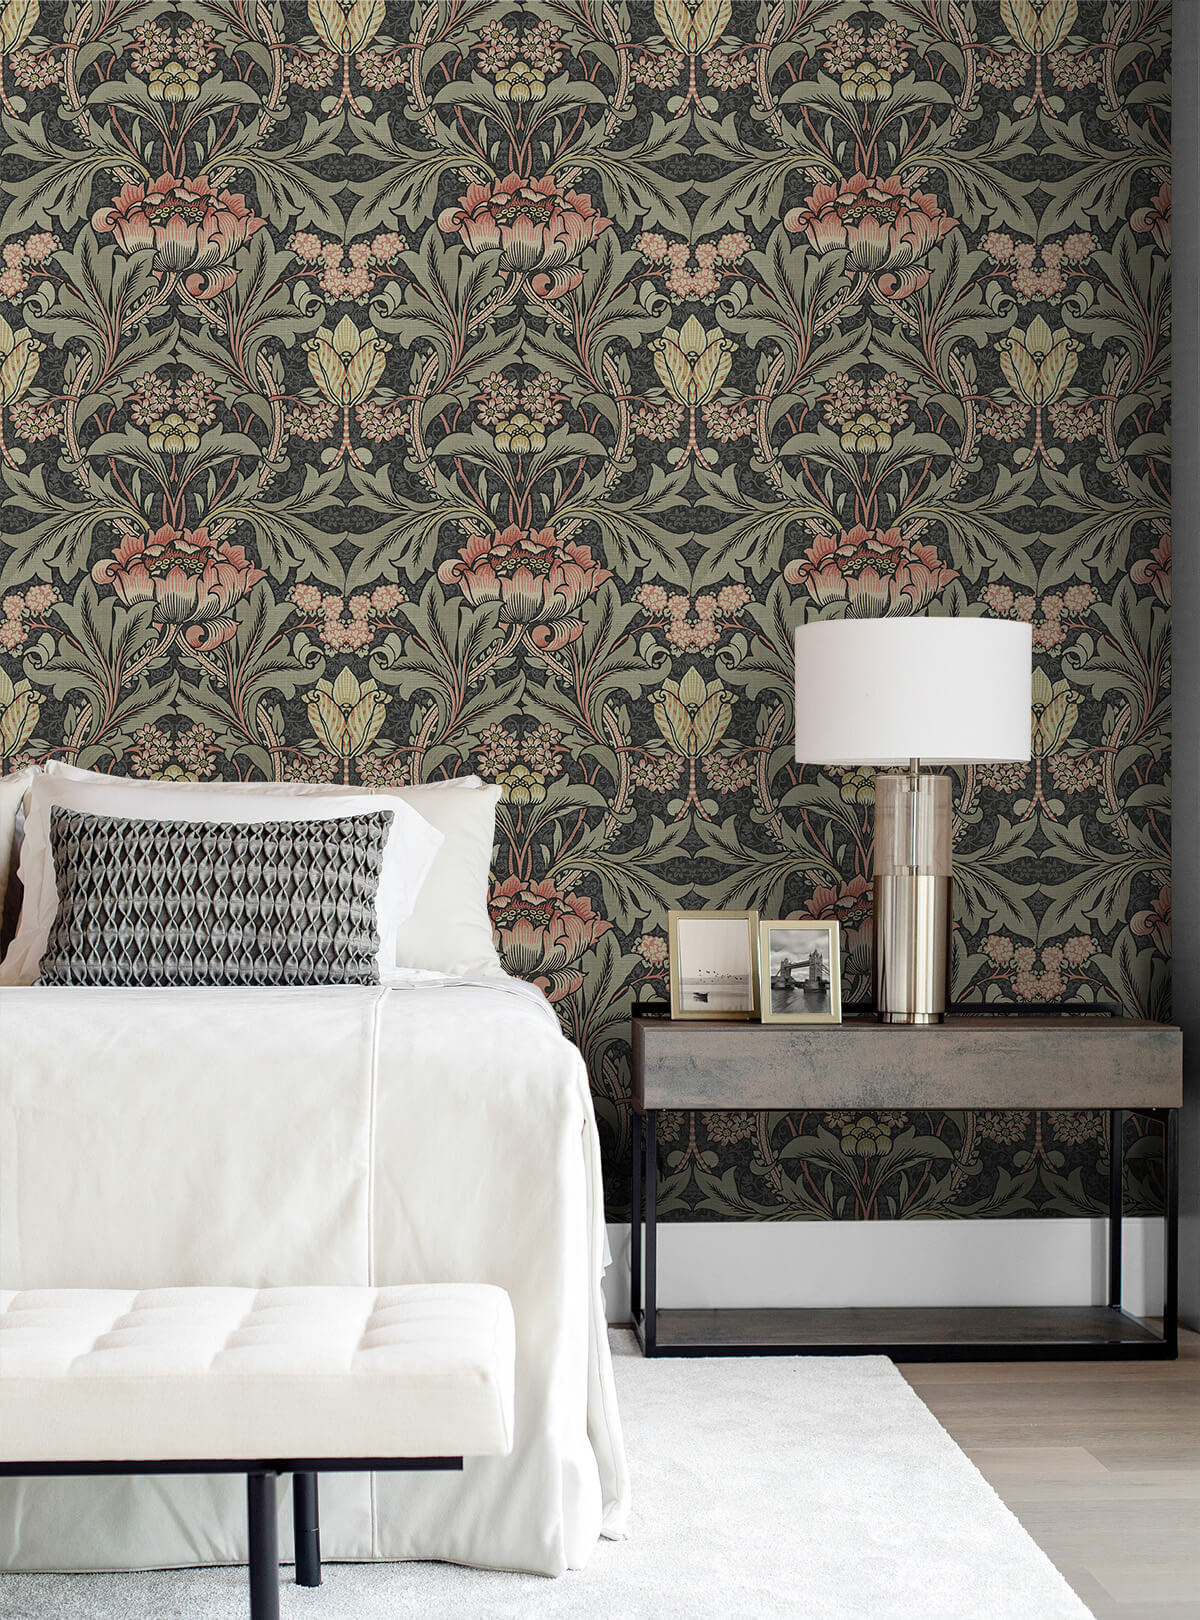 Seabrook Designs Acanthus Floral Wallpaper - Charcoal & Rosewood